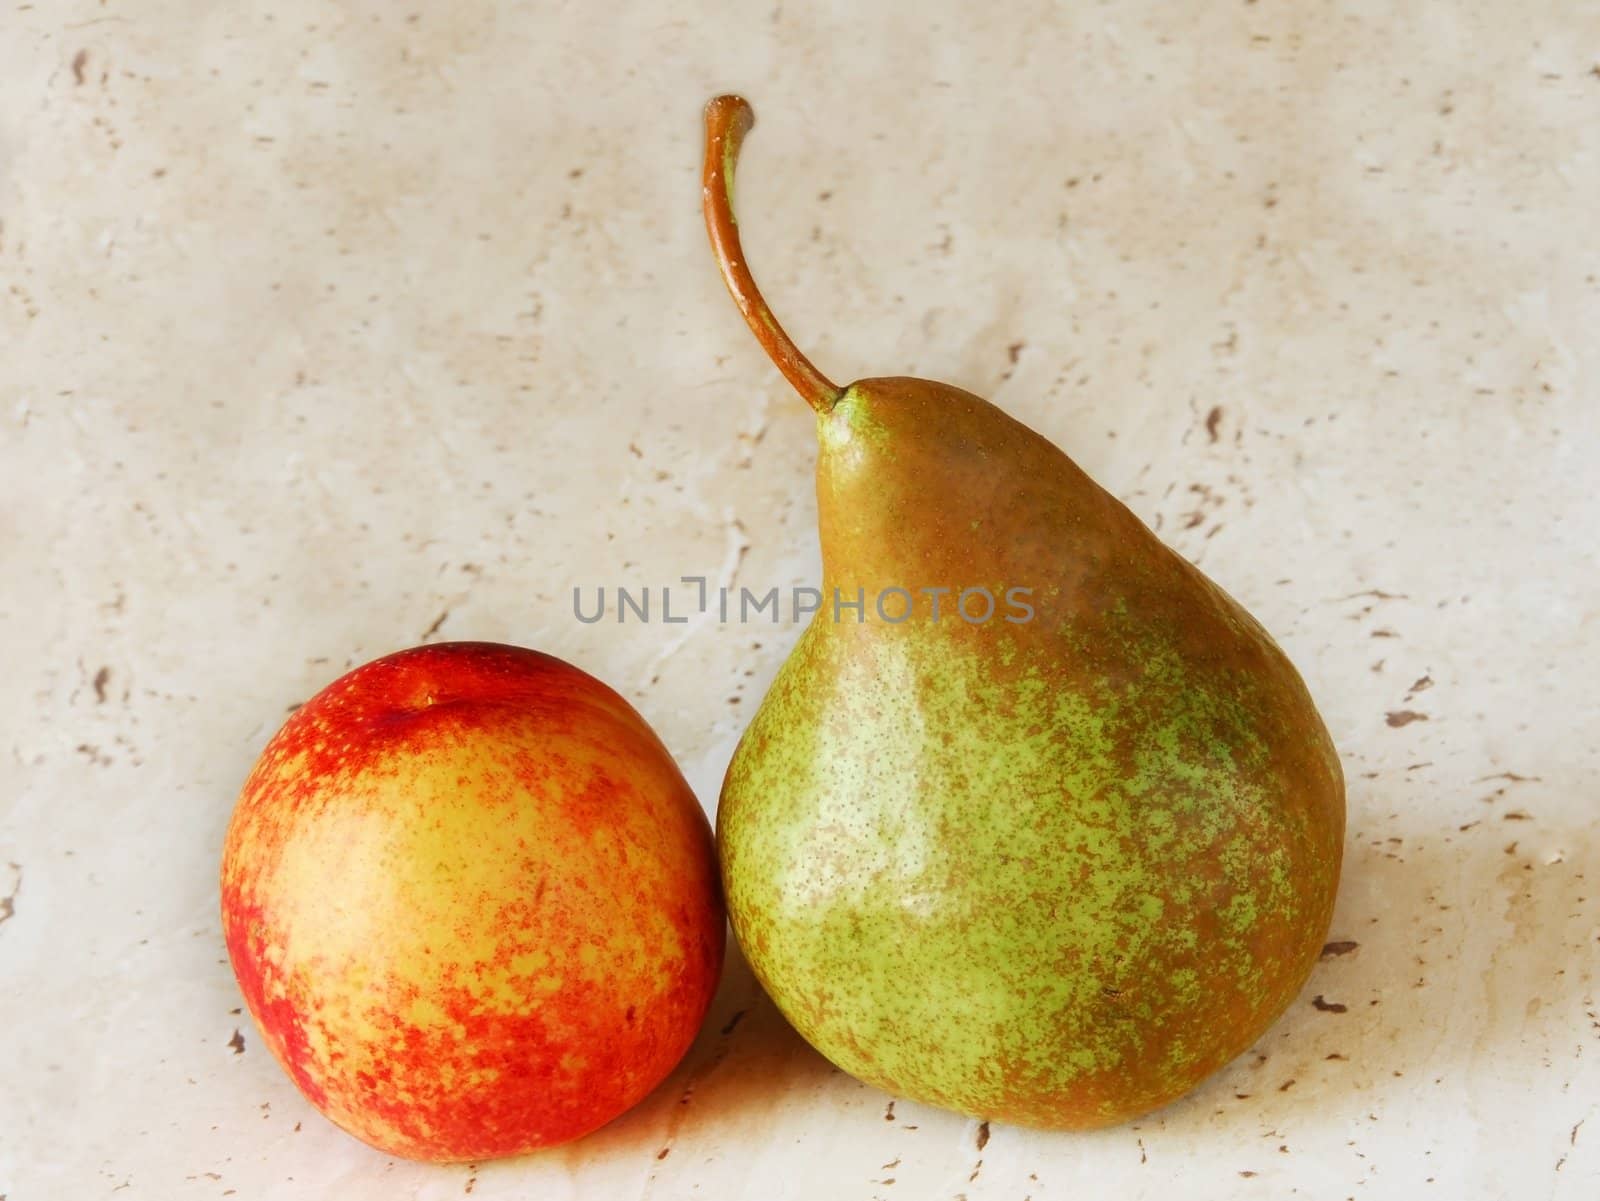 two ripe fruits, peach and pear, on the table